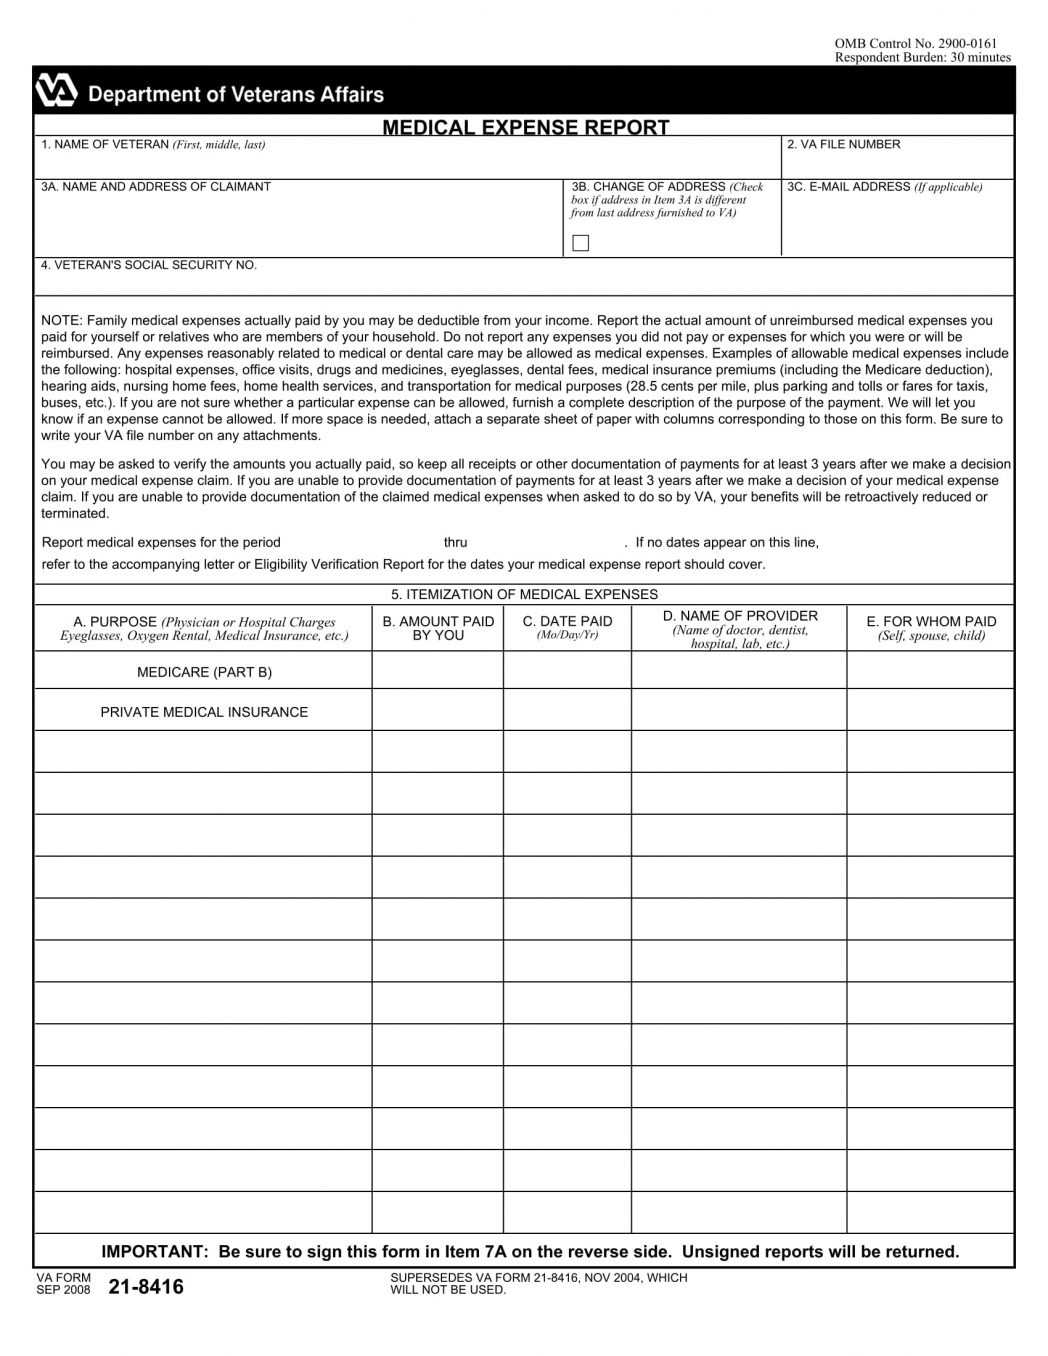 027 Expense Report Forms Free Word Format Form Me Google Throughout Medical Report Template Free Downloads